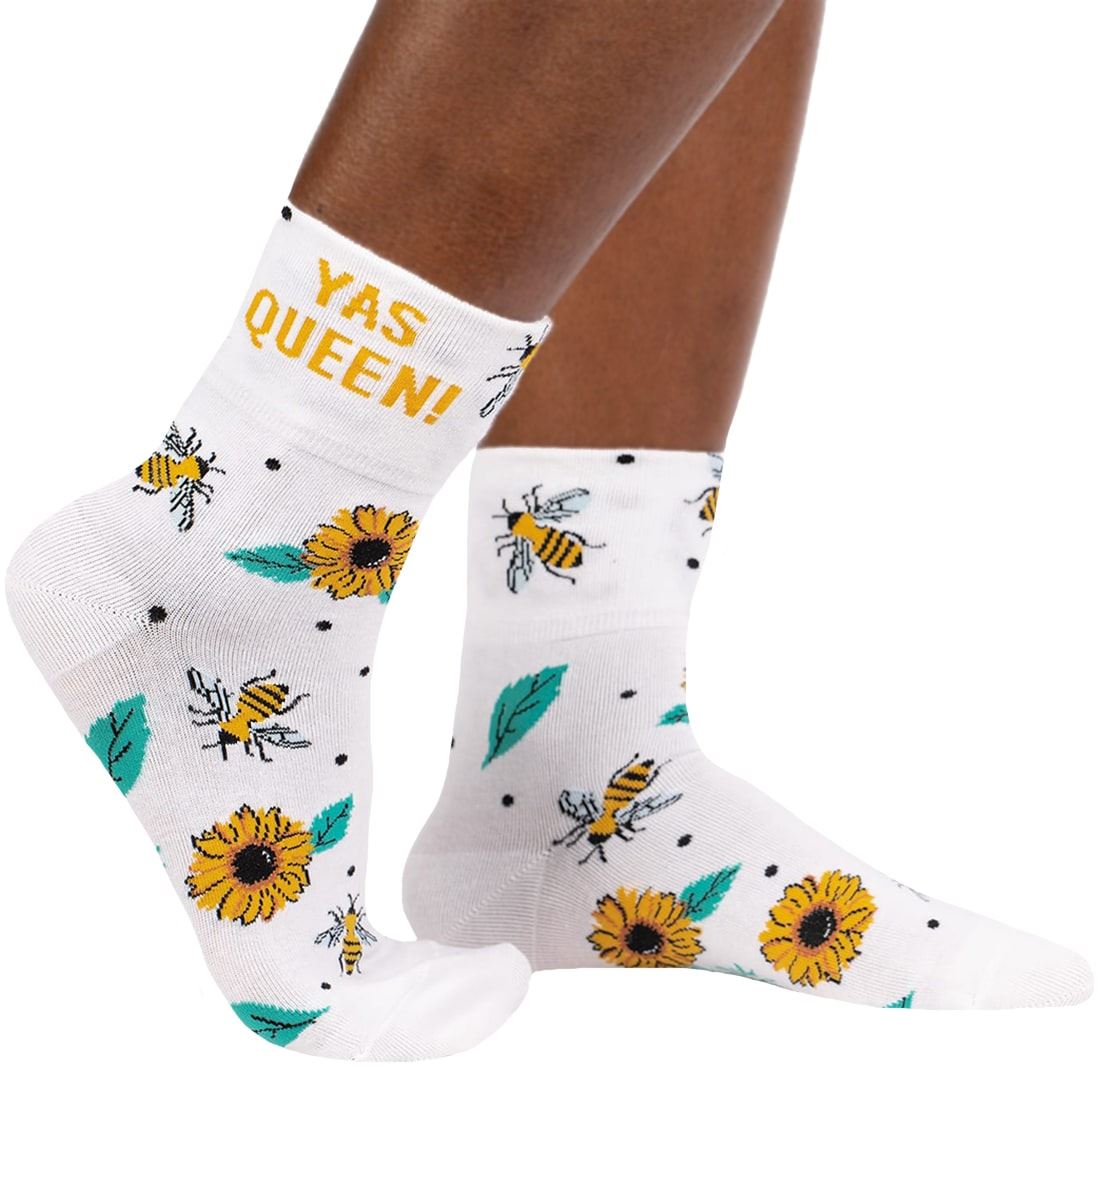 SOCK it to me 2-Way Turn Cuff Crew Socks (q0008),Yas Queen - Yas Queen,One Size